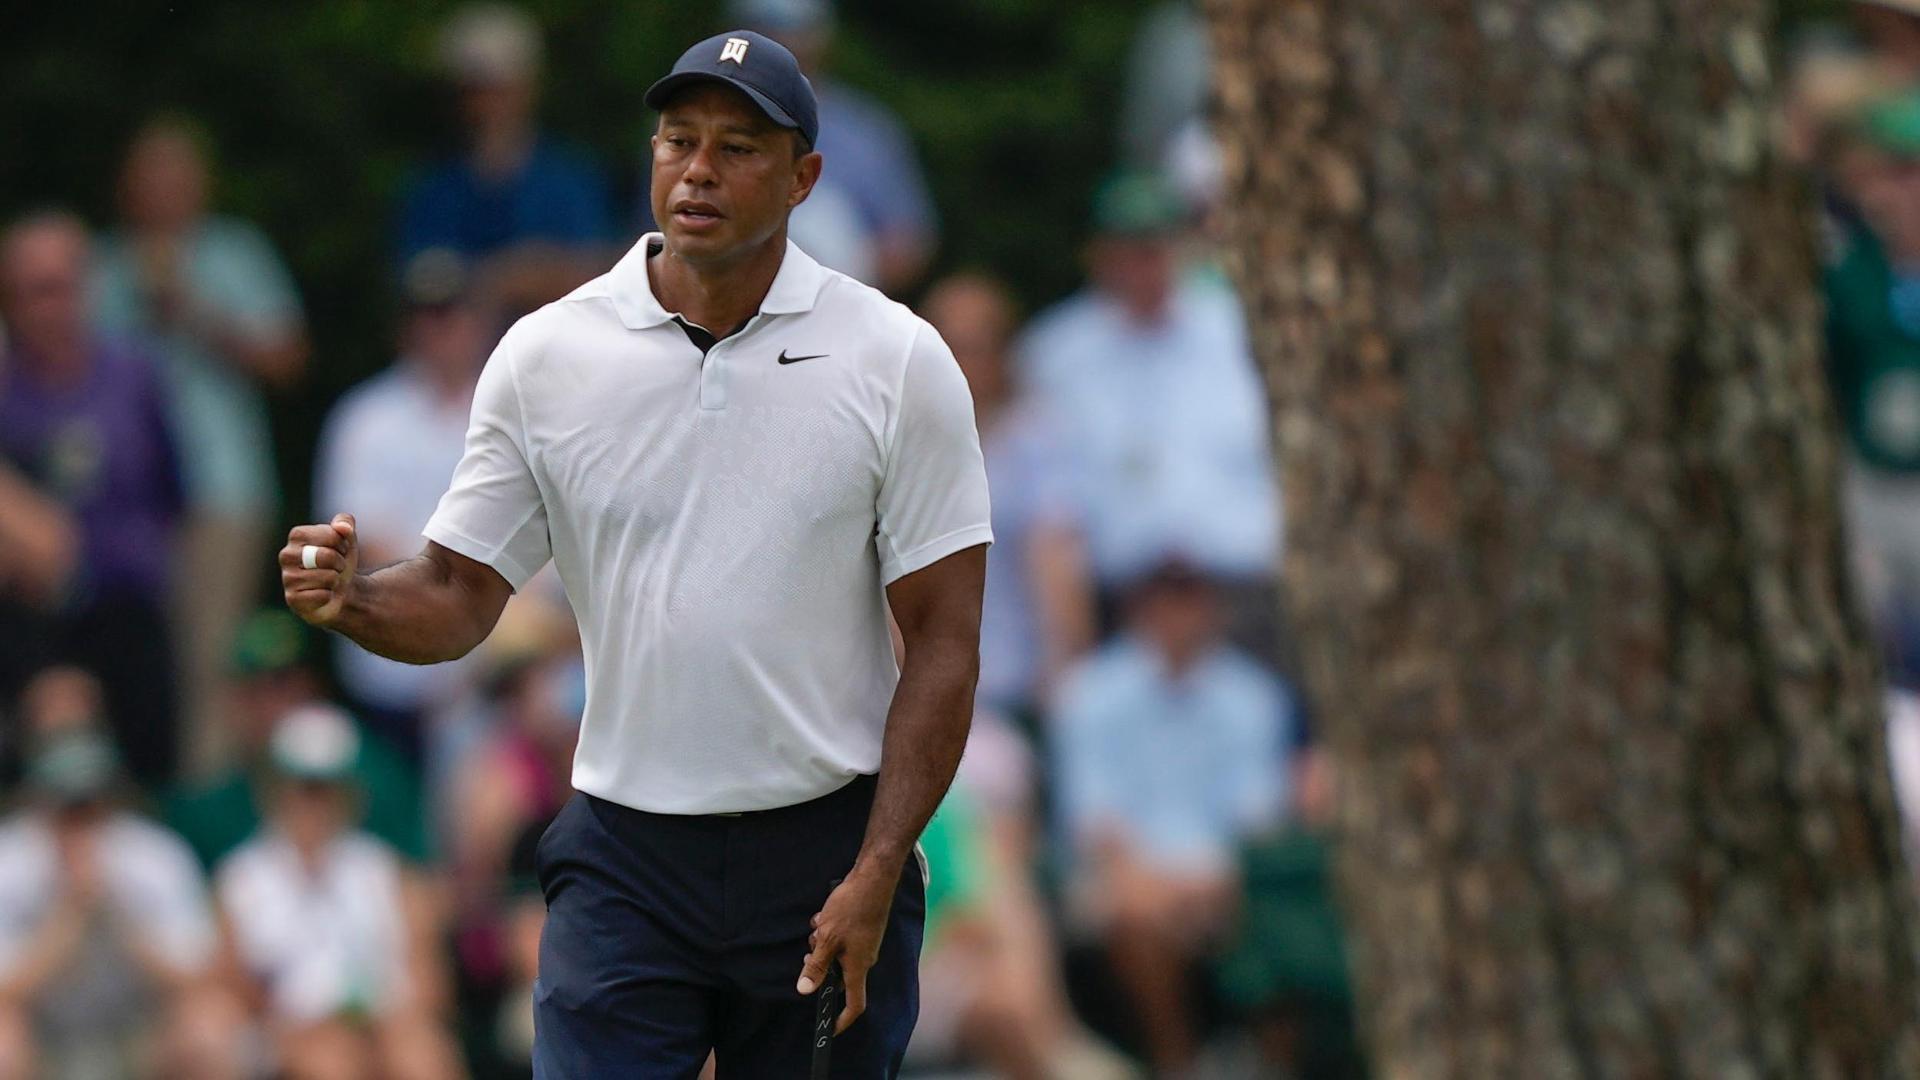 Tiger gives fist bump after long birdie putt